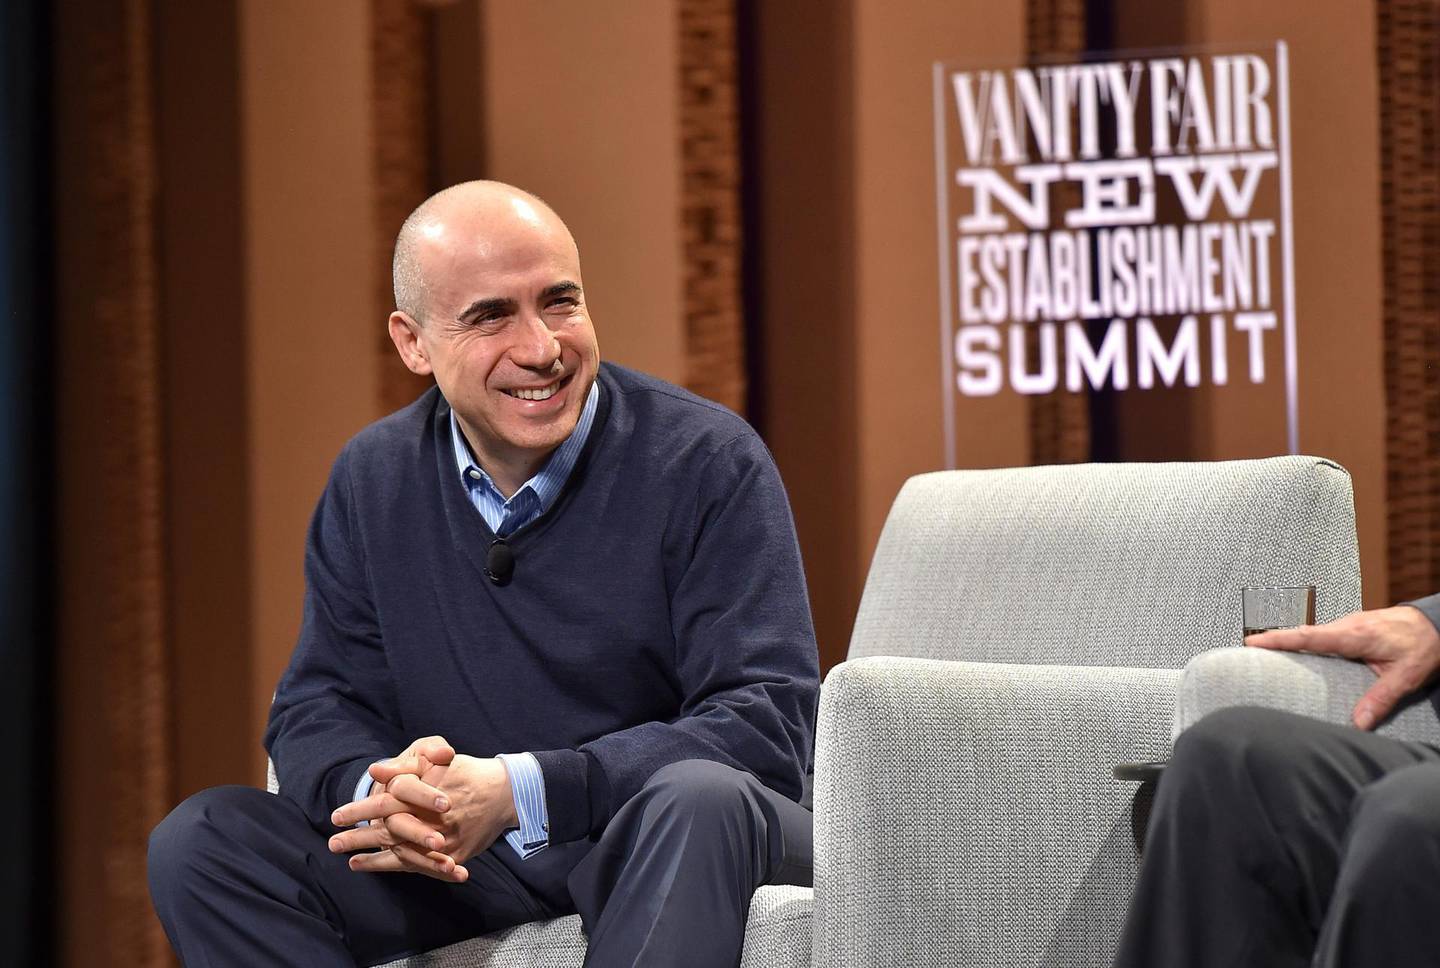 SAN FRANCISCO, CA - OCTOBER 07:  DST Global Founder Yuri Milner speaks onstage during "Are We Alone in the Universe?" at the Vanity Fair New Establishment Summit at Yerba Buena Center for the Arts on October 7, 2015 in San Francisco, California.  (Photo by Mike Windle/Getty Images for Vanity Fair)